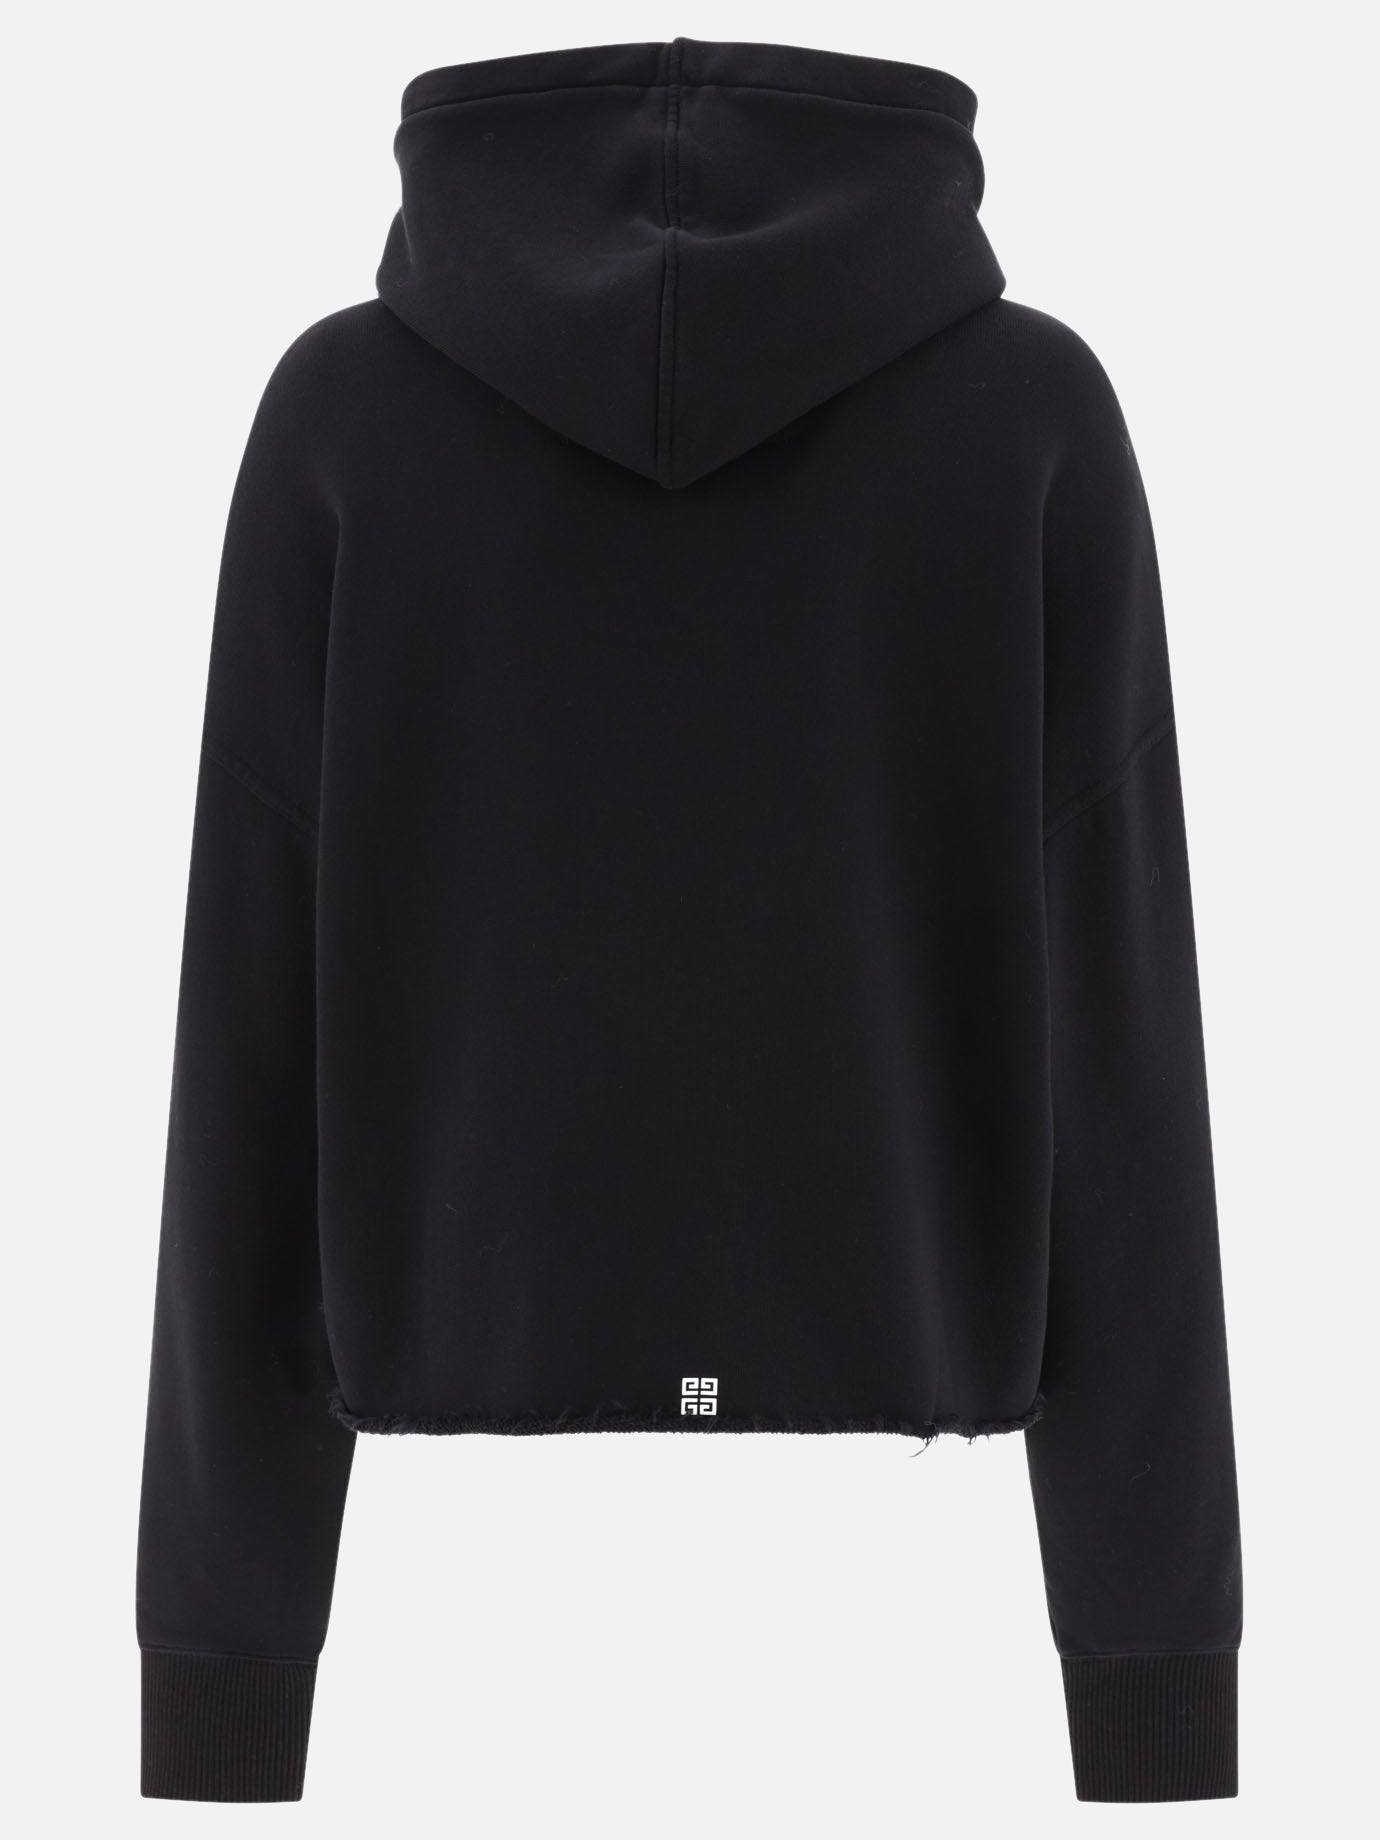 "Givenchy" cropped hoodie